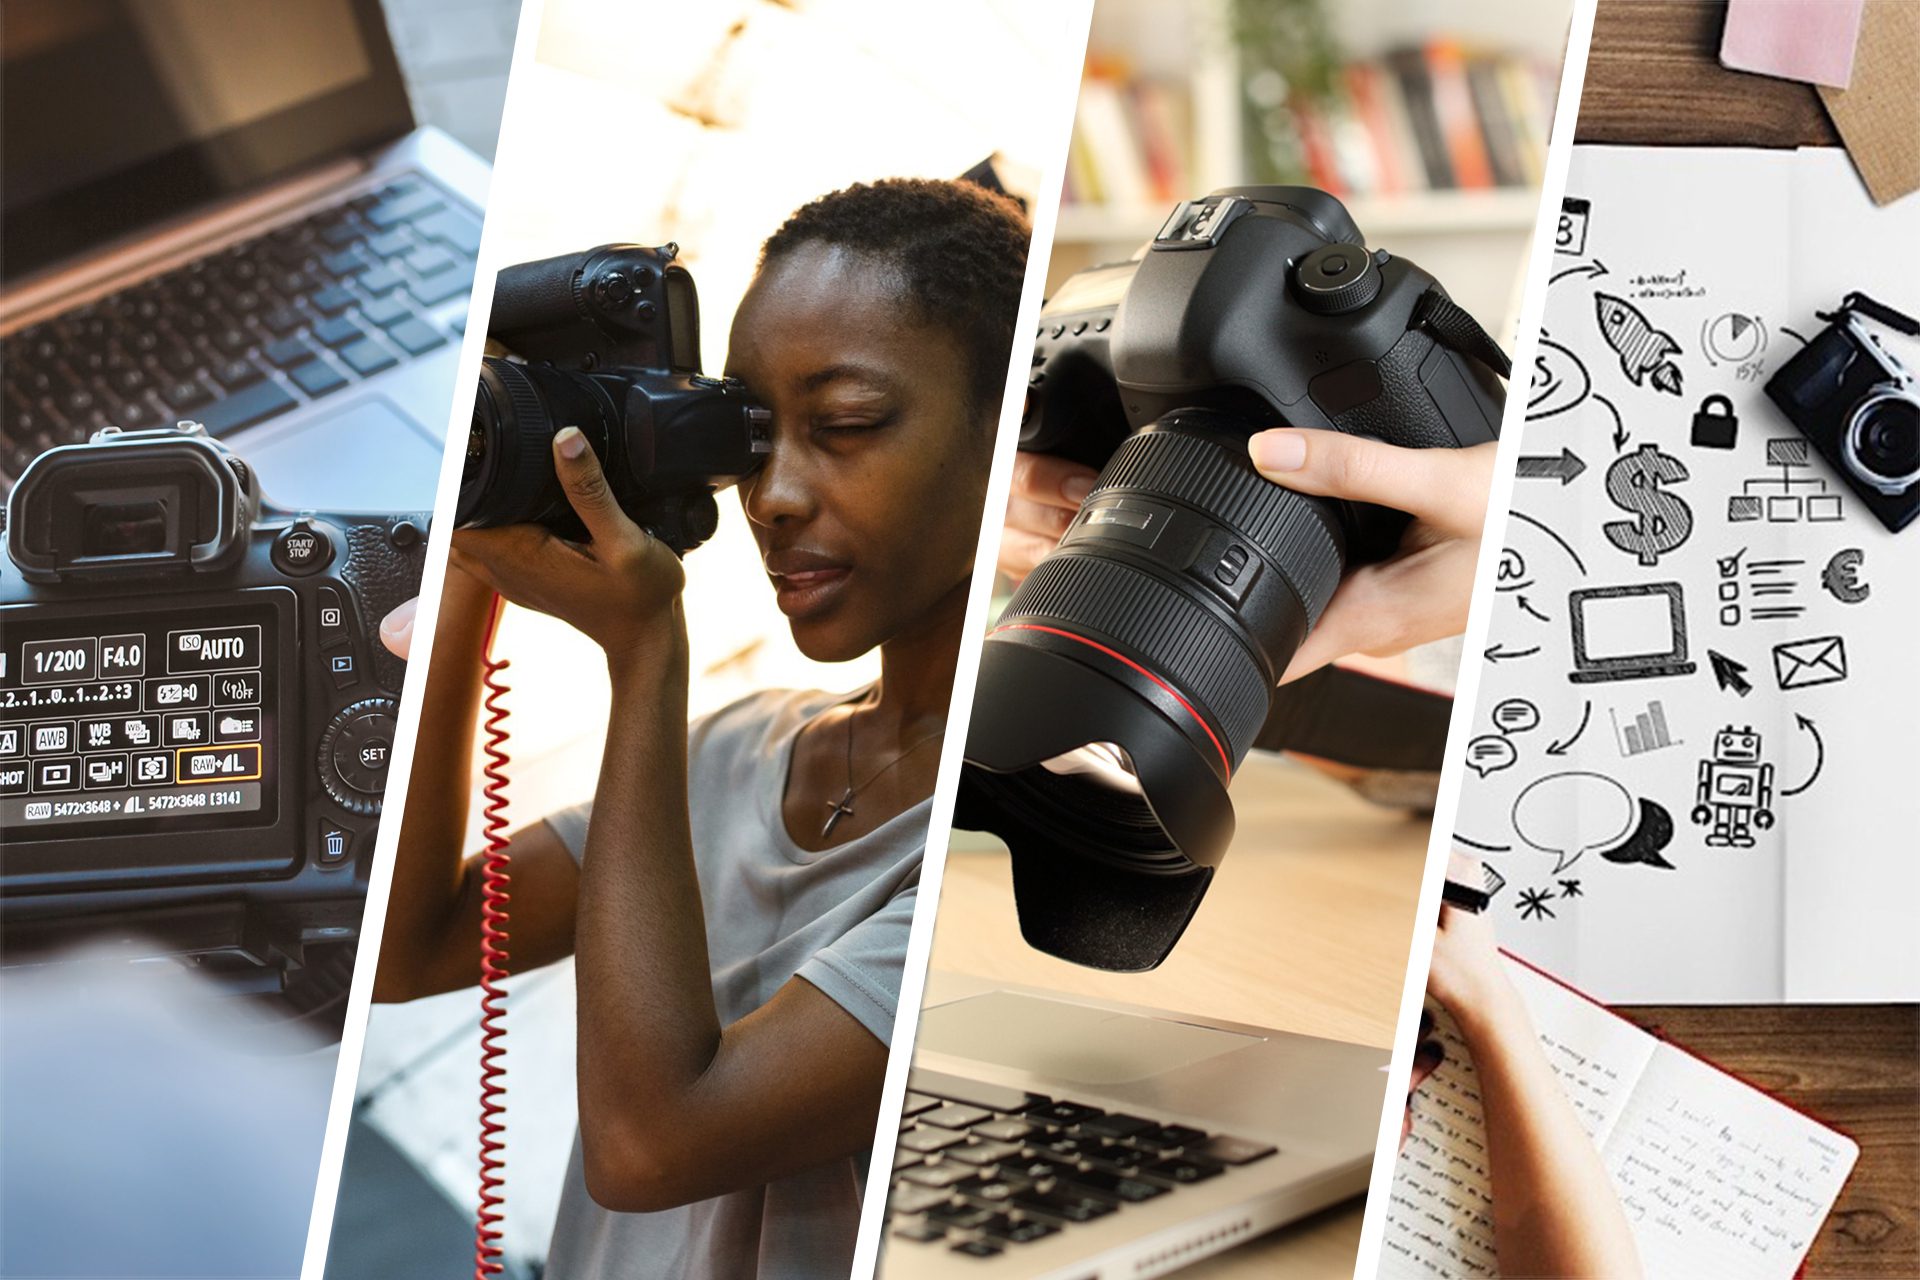 How To Start a Photography Business: The Complete Guide